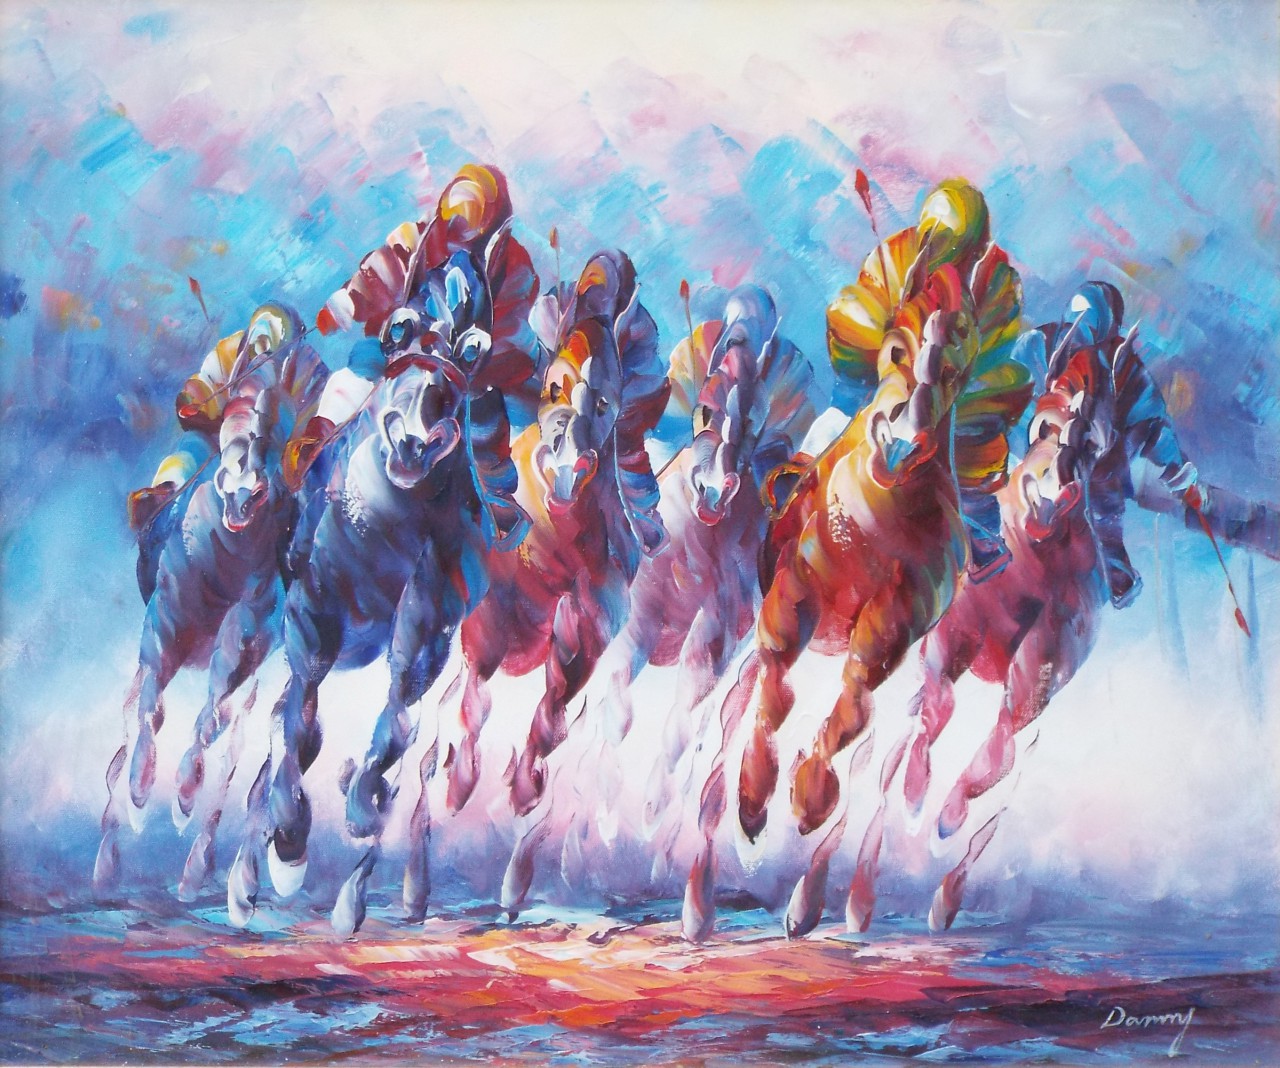 Oil on canvas - (Abstract Horse Racing)